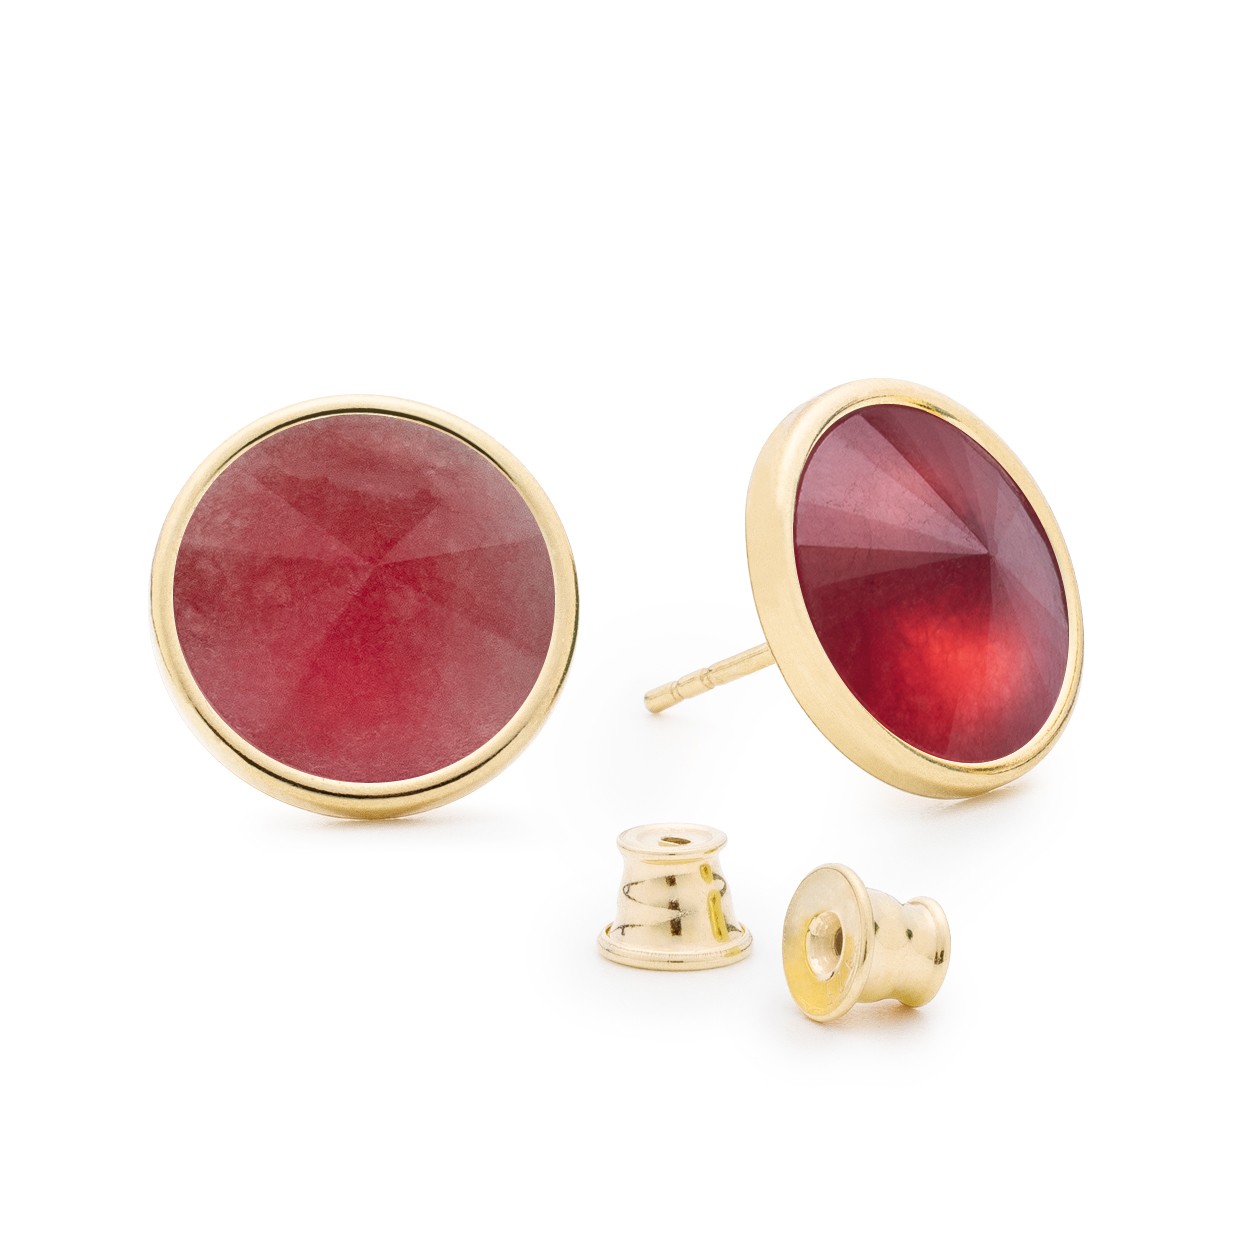 Earrings with dark round natural stone, 925